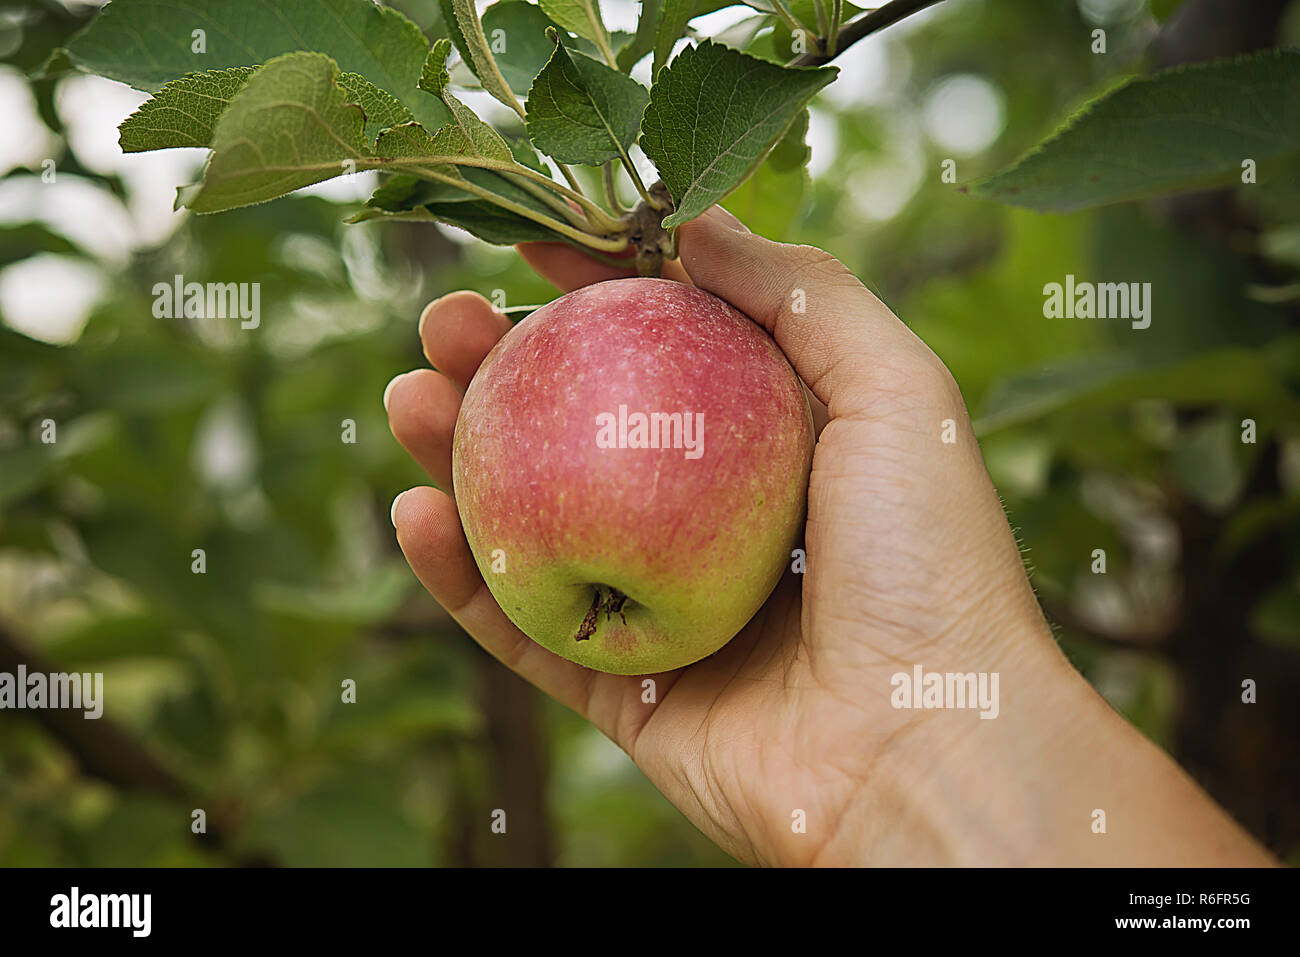 Farmer's hand is holding juicy red side apple that is hanging on apple tree branch. Autumn or summer harvest time and healthy eating concepts. Unfocus Stock Photo